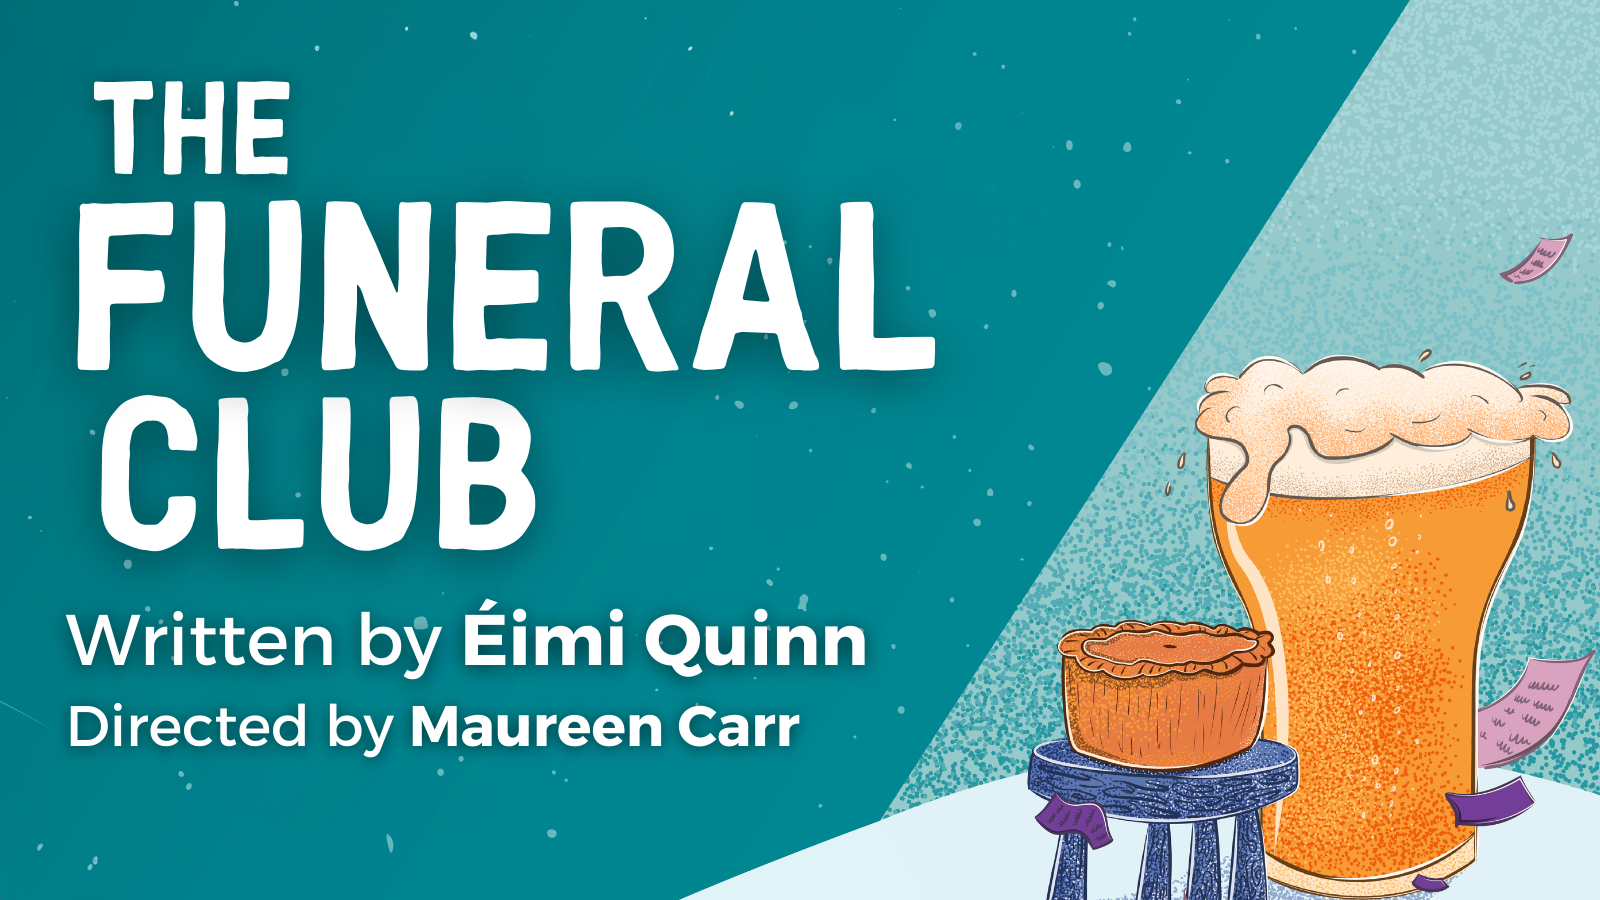 The Funeral Club